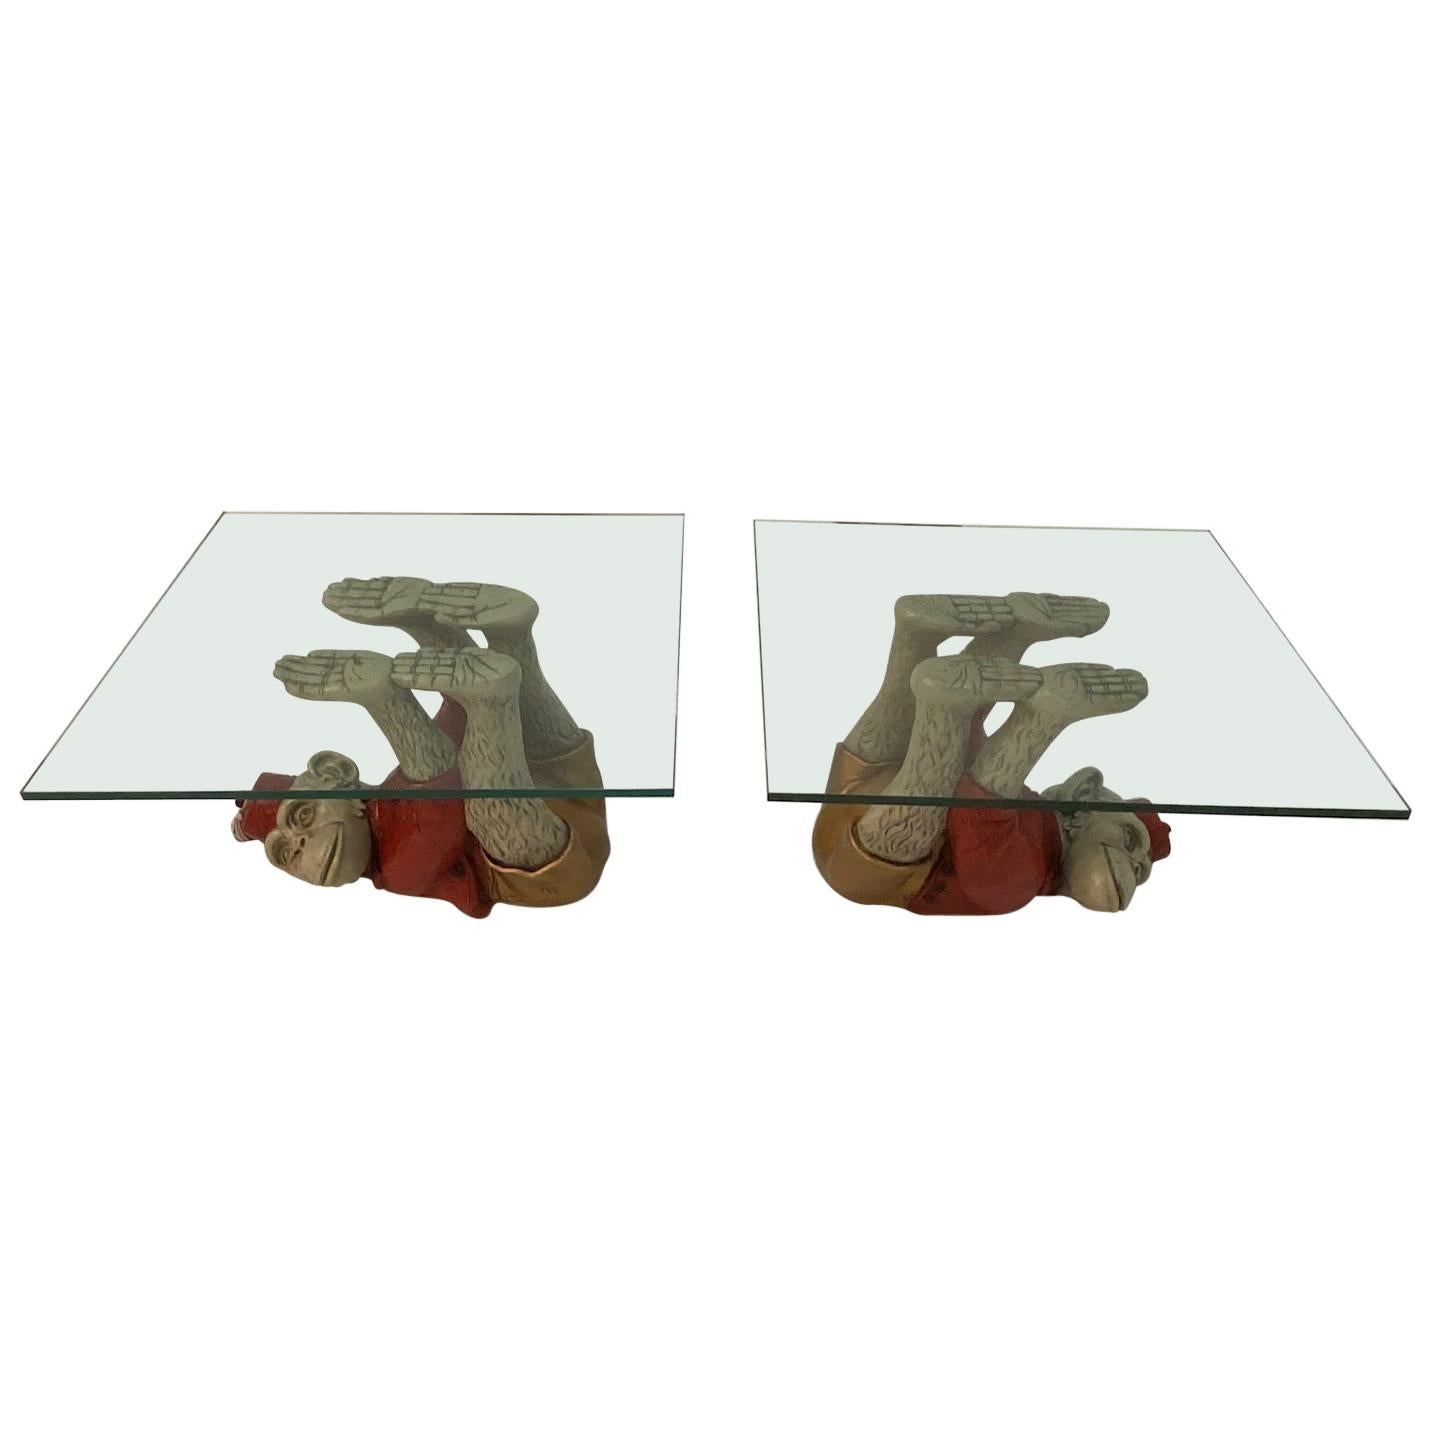 Wonderful Pair of Whimsical Monkey Motife End Tables Coffee Table